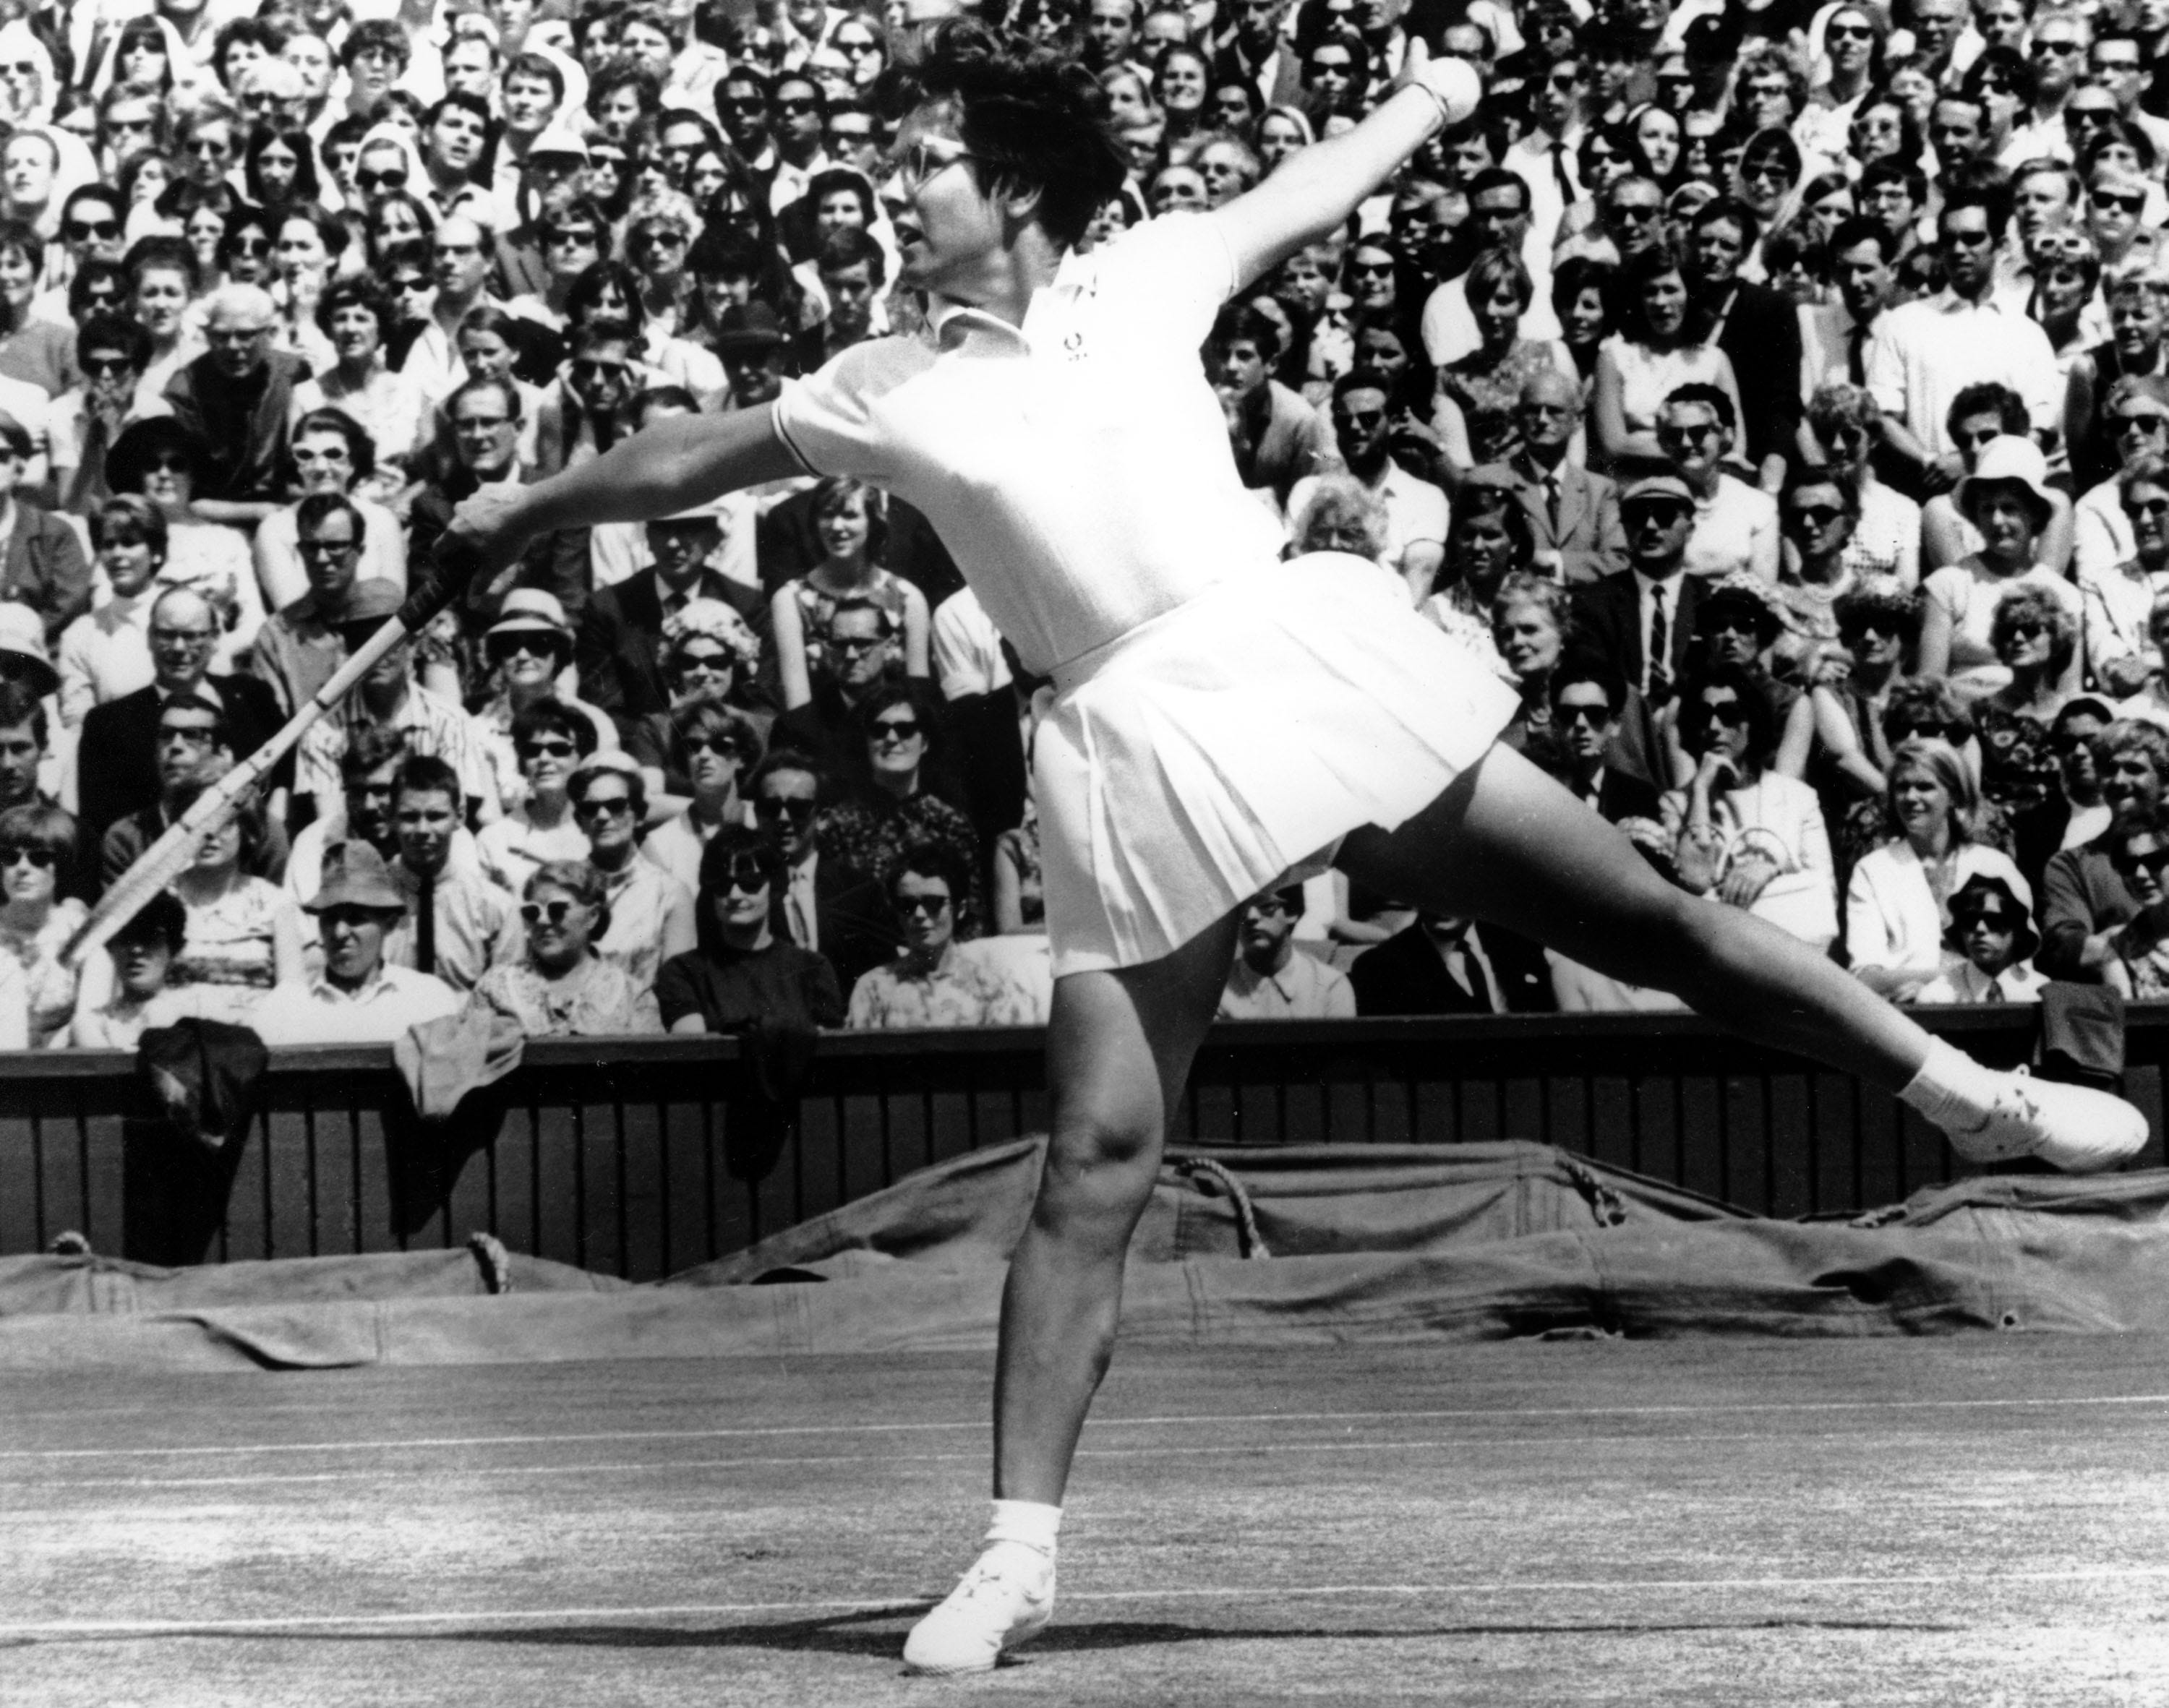 American tennis player Billie Jean King is seen in play during the women's singles at the All England Lawn Tennis Championships at Wimbledon in London on July 8, 1967. King defeated her opponent Anne Jones of Britain. (AP Photo)